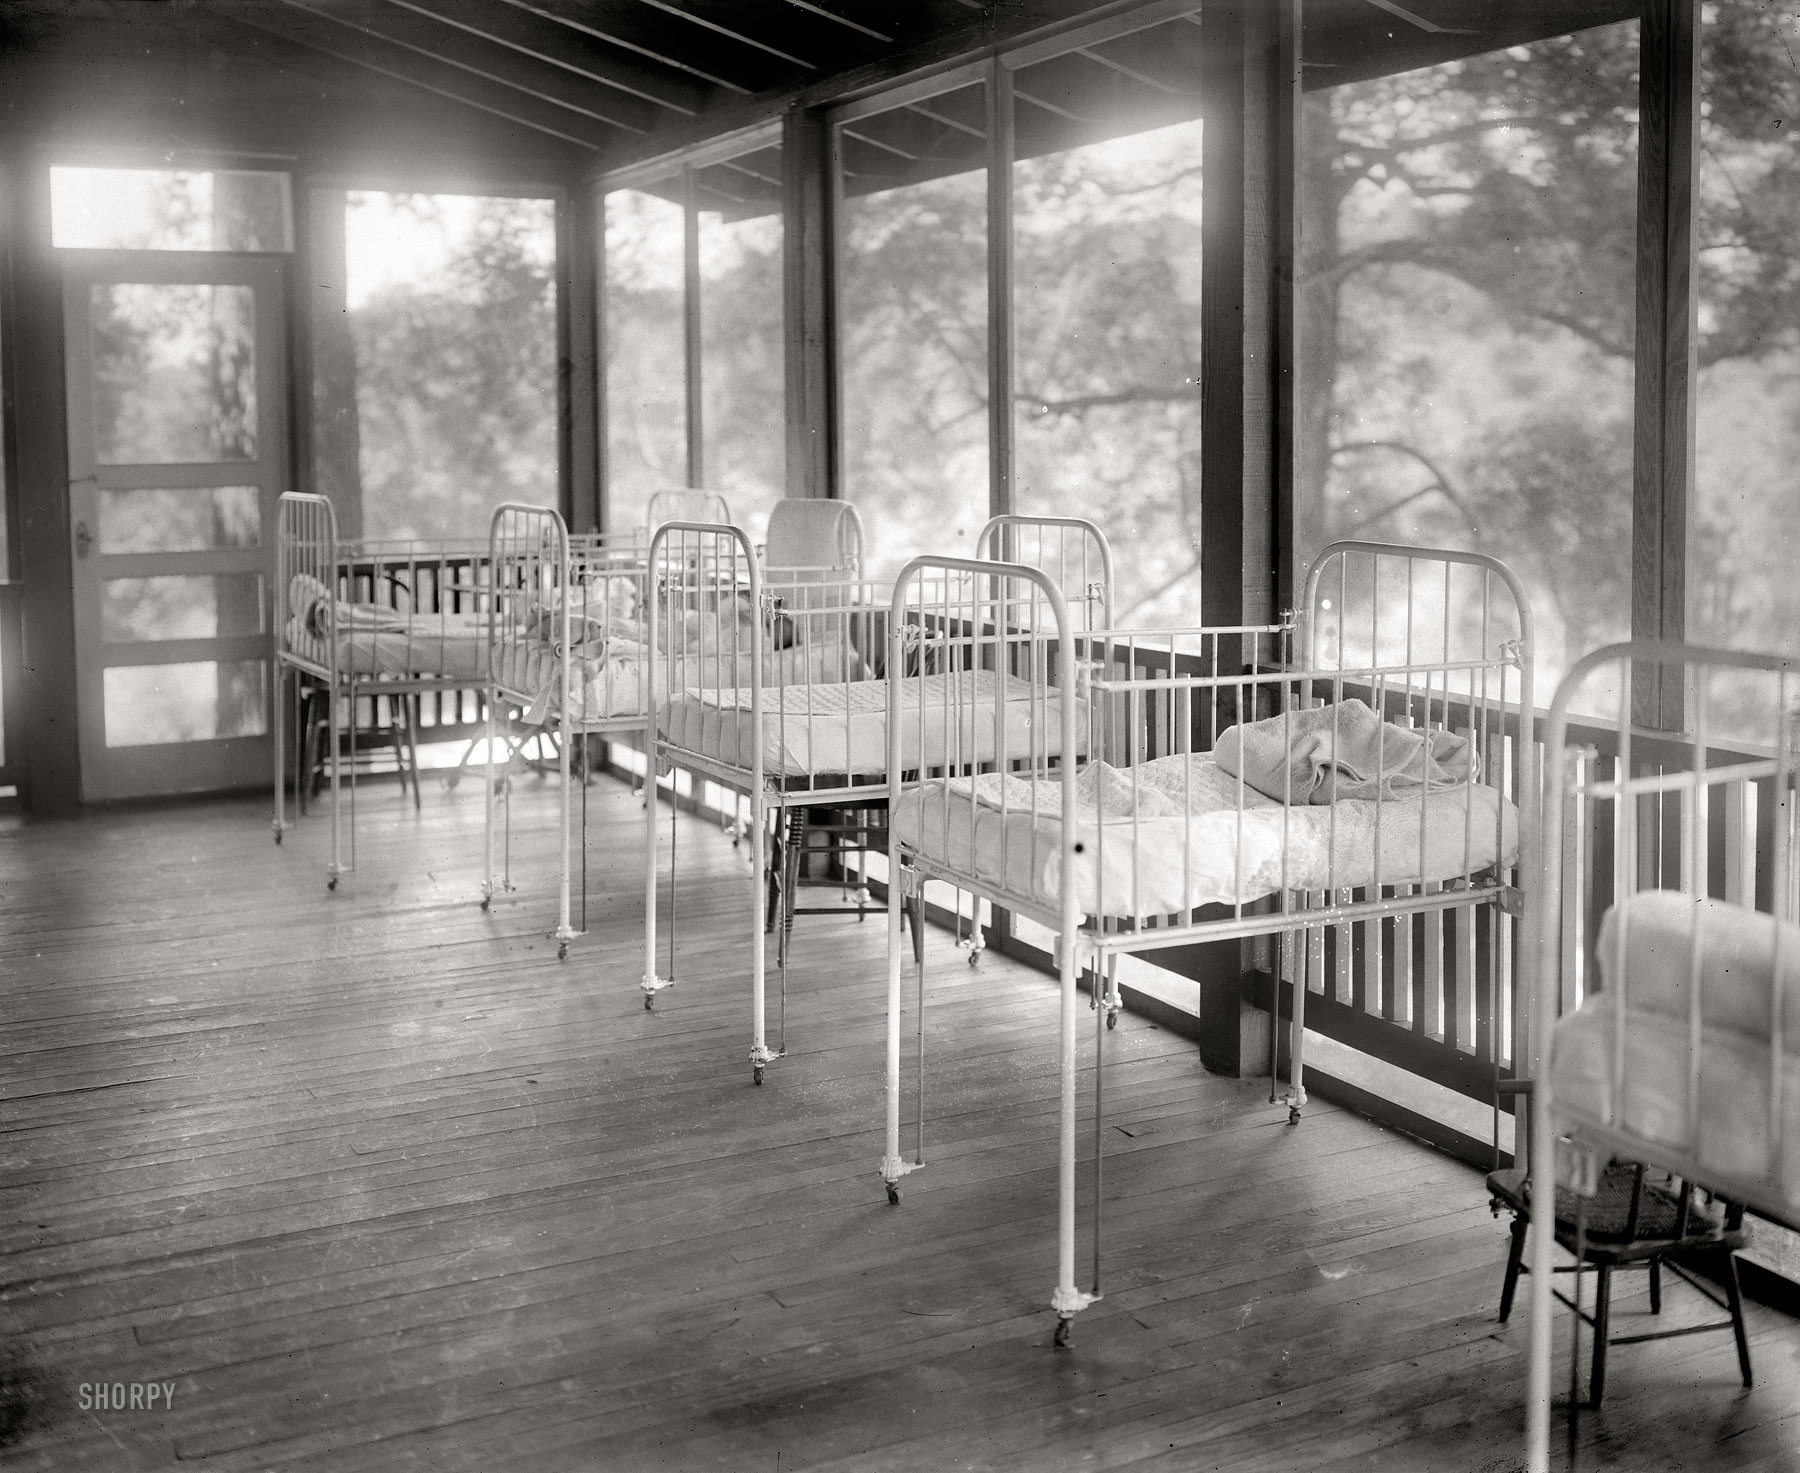 July 14, 1913. Rock Creek Park in Washington, D.C. "Camp Goodwill baby hospital." National Photo Company Collection glass negative. View full size.